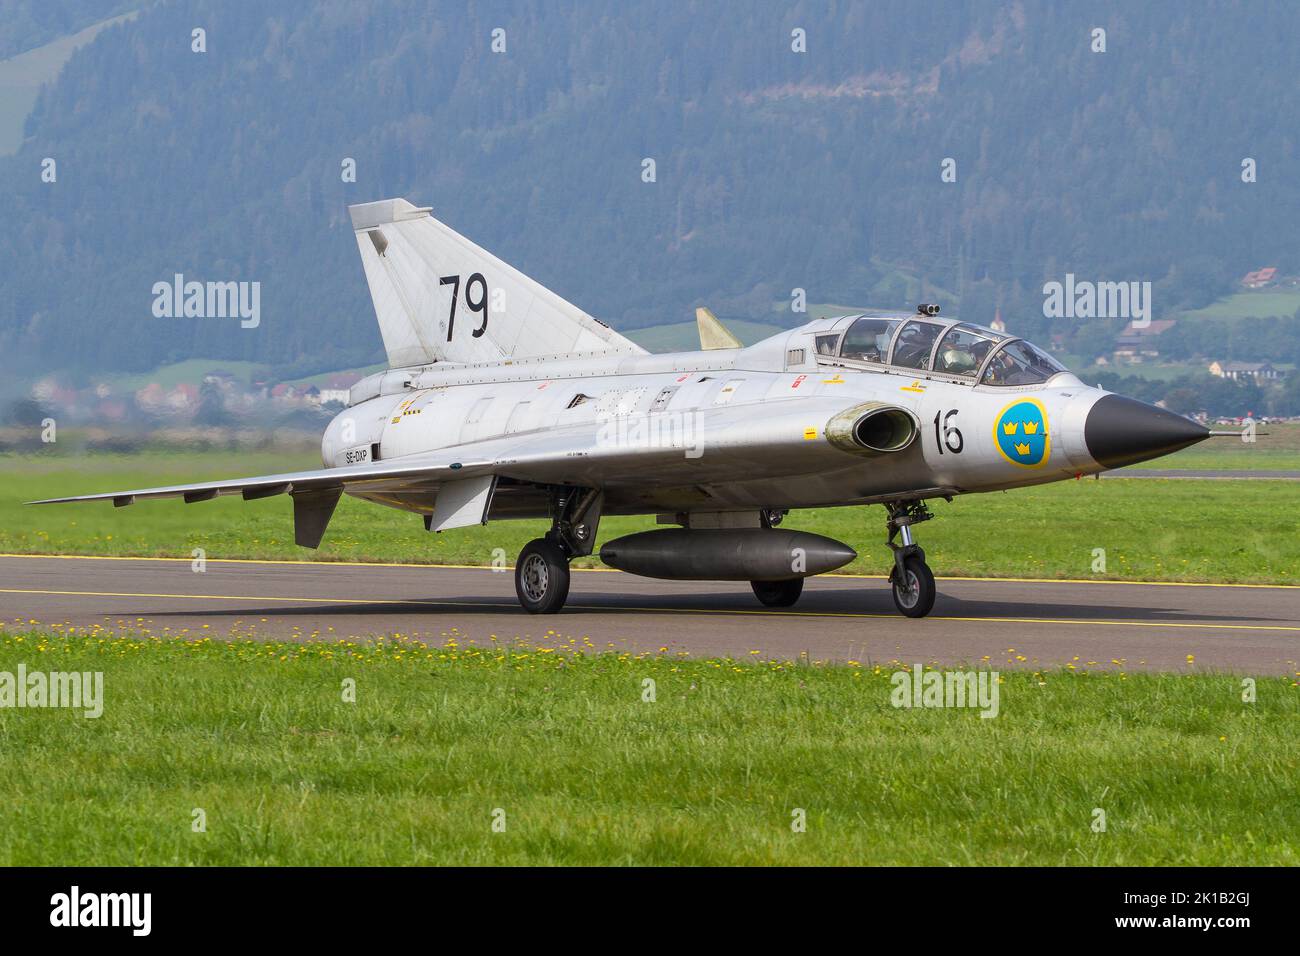 A Saab Draken military jet of the Swedish Air Force landing in Zeltweg, Austria to attend the Airpower airshow Stock Photo